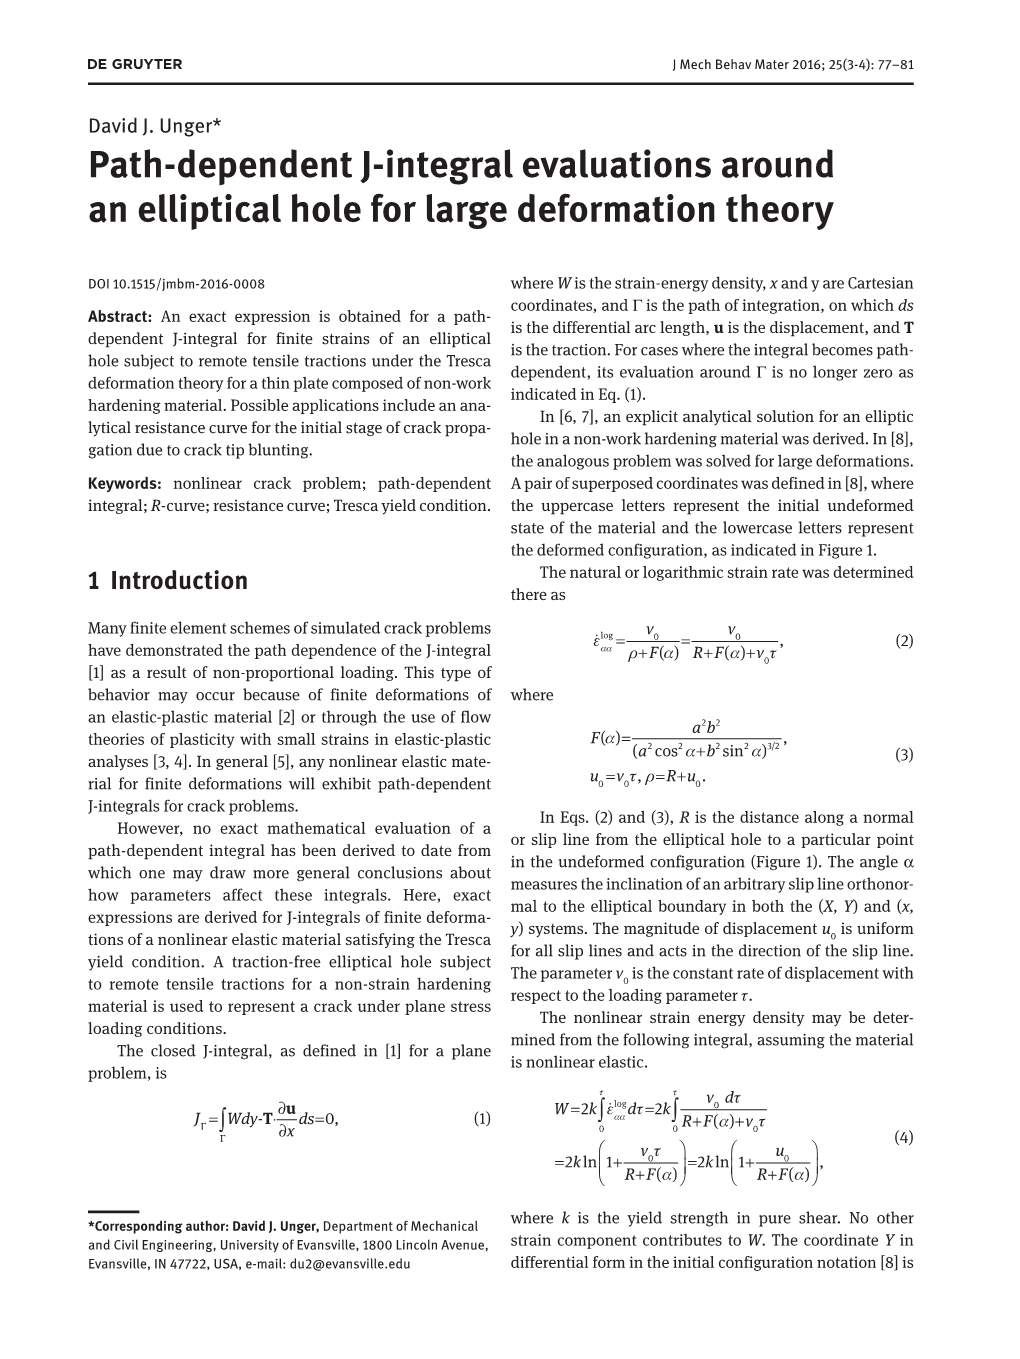 Path-Dependent J-Integral Evaluations Around an Elliptical Hole for Large Deformation Theory